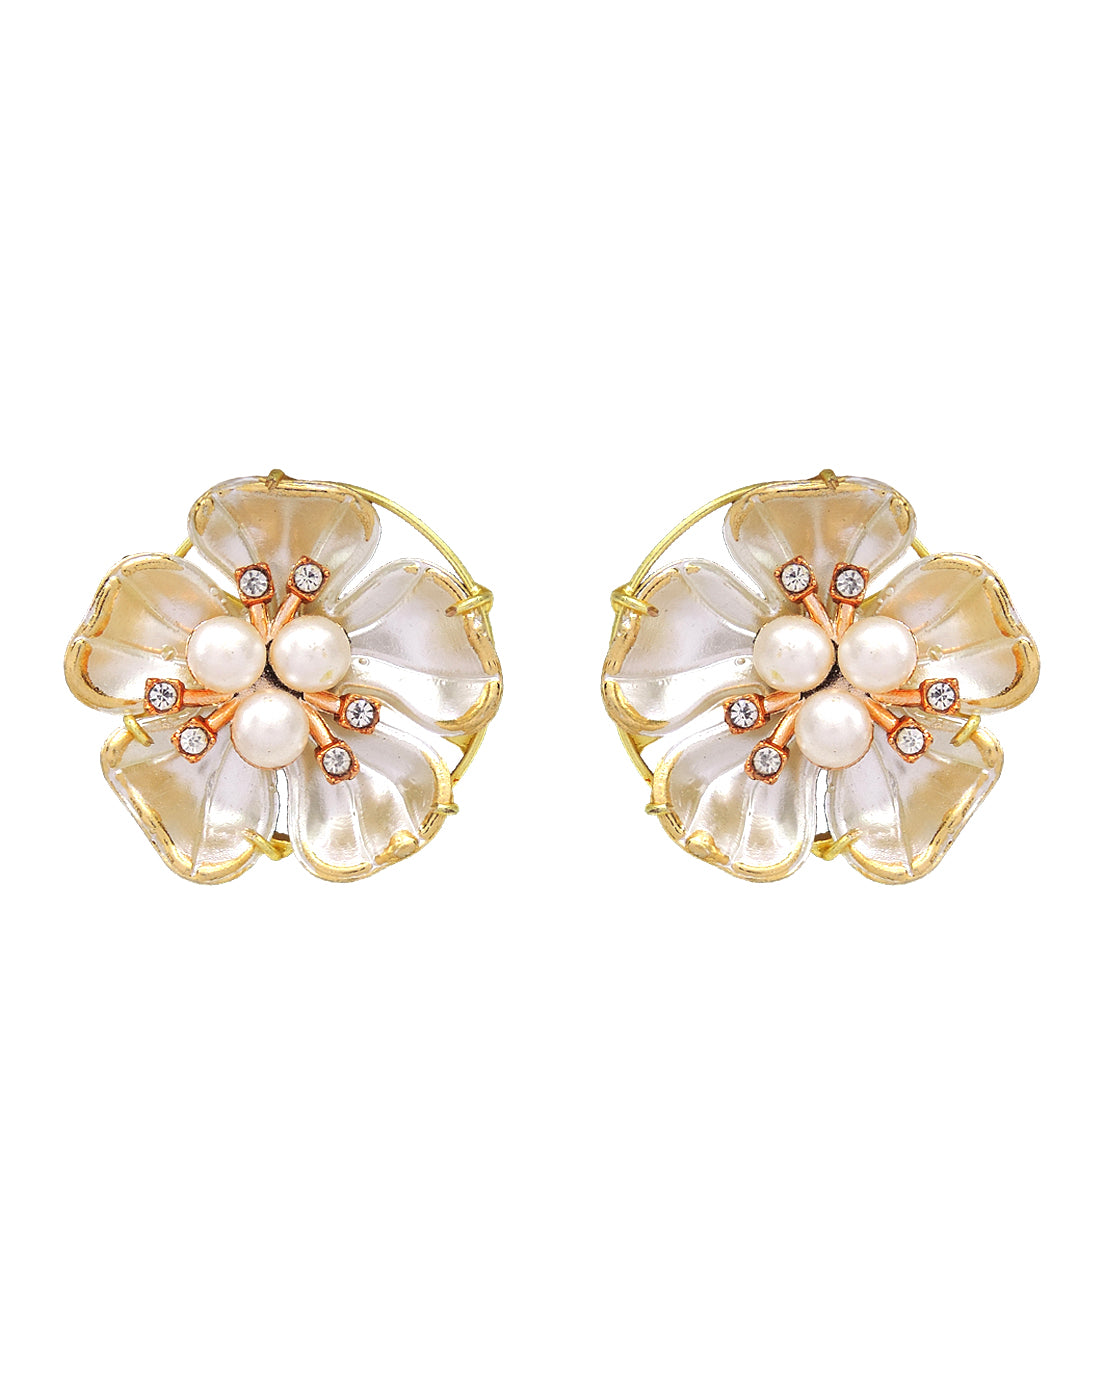 White Lily Earrings - Statement Earrings - Gold-Plated & Hypoallergenic Jewellery - Made in India - Dubai Jewellery - Dori